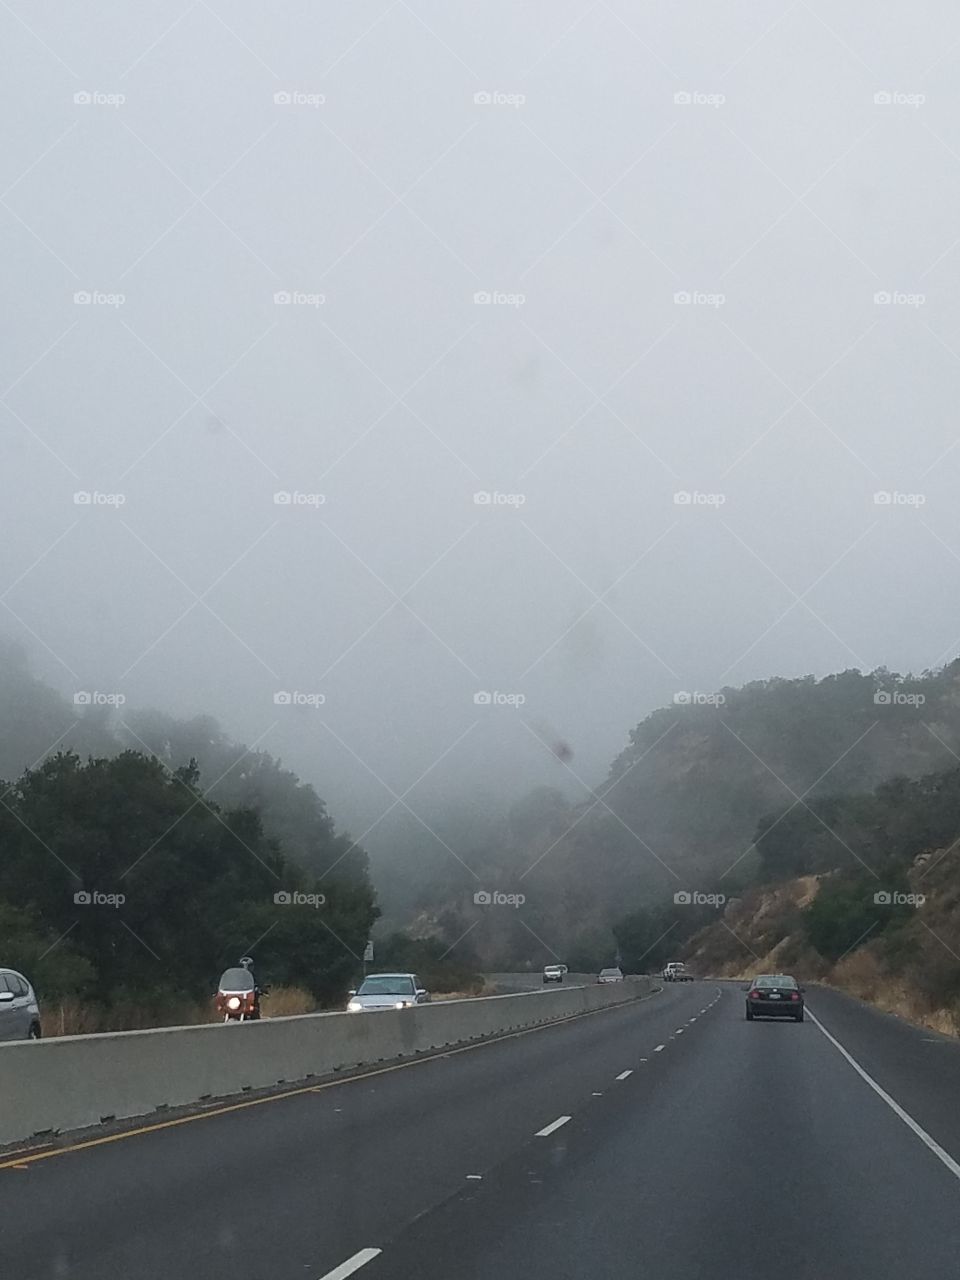 Foggy morning on the road